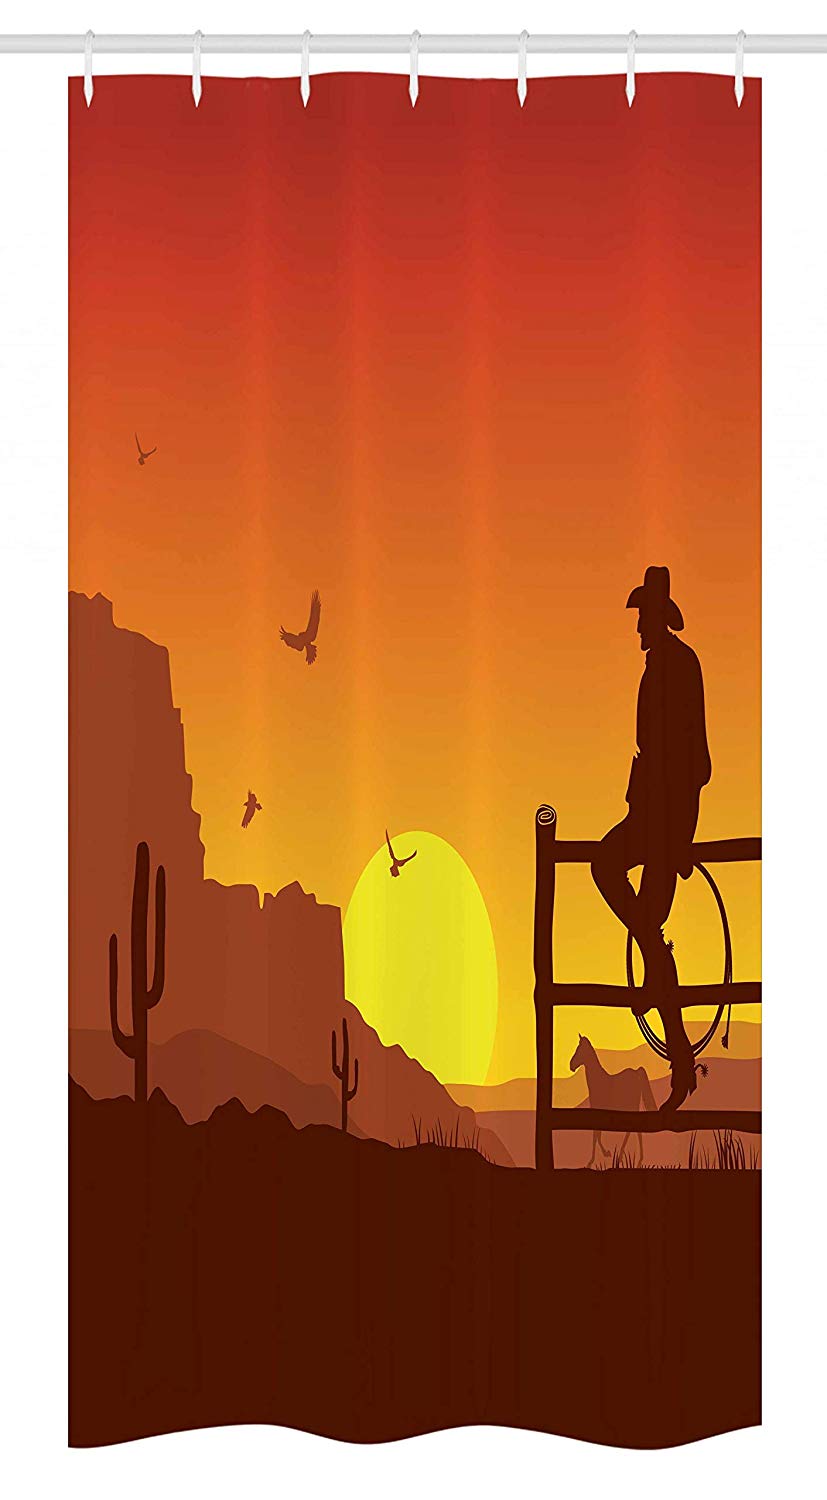 Ambesonne Western Stall Shower Curtain, Silhouette of Cowboy in Wild West Sunset Scene American Culture Image Print, Fabric Bathroom Decor Set with Hooks, 36